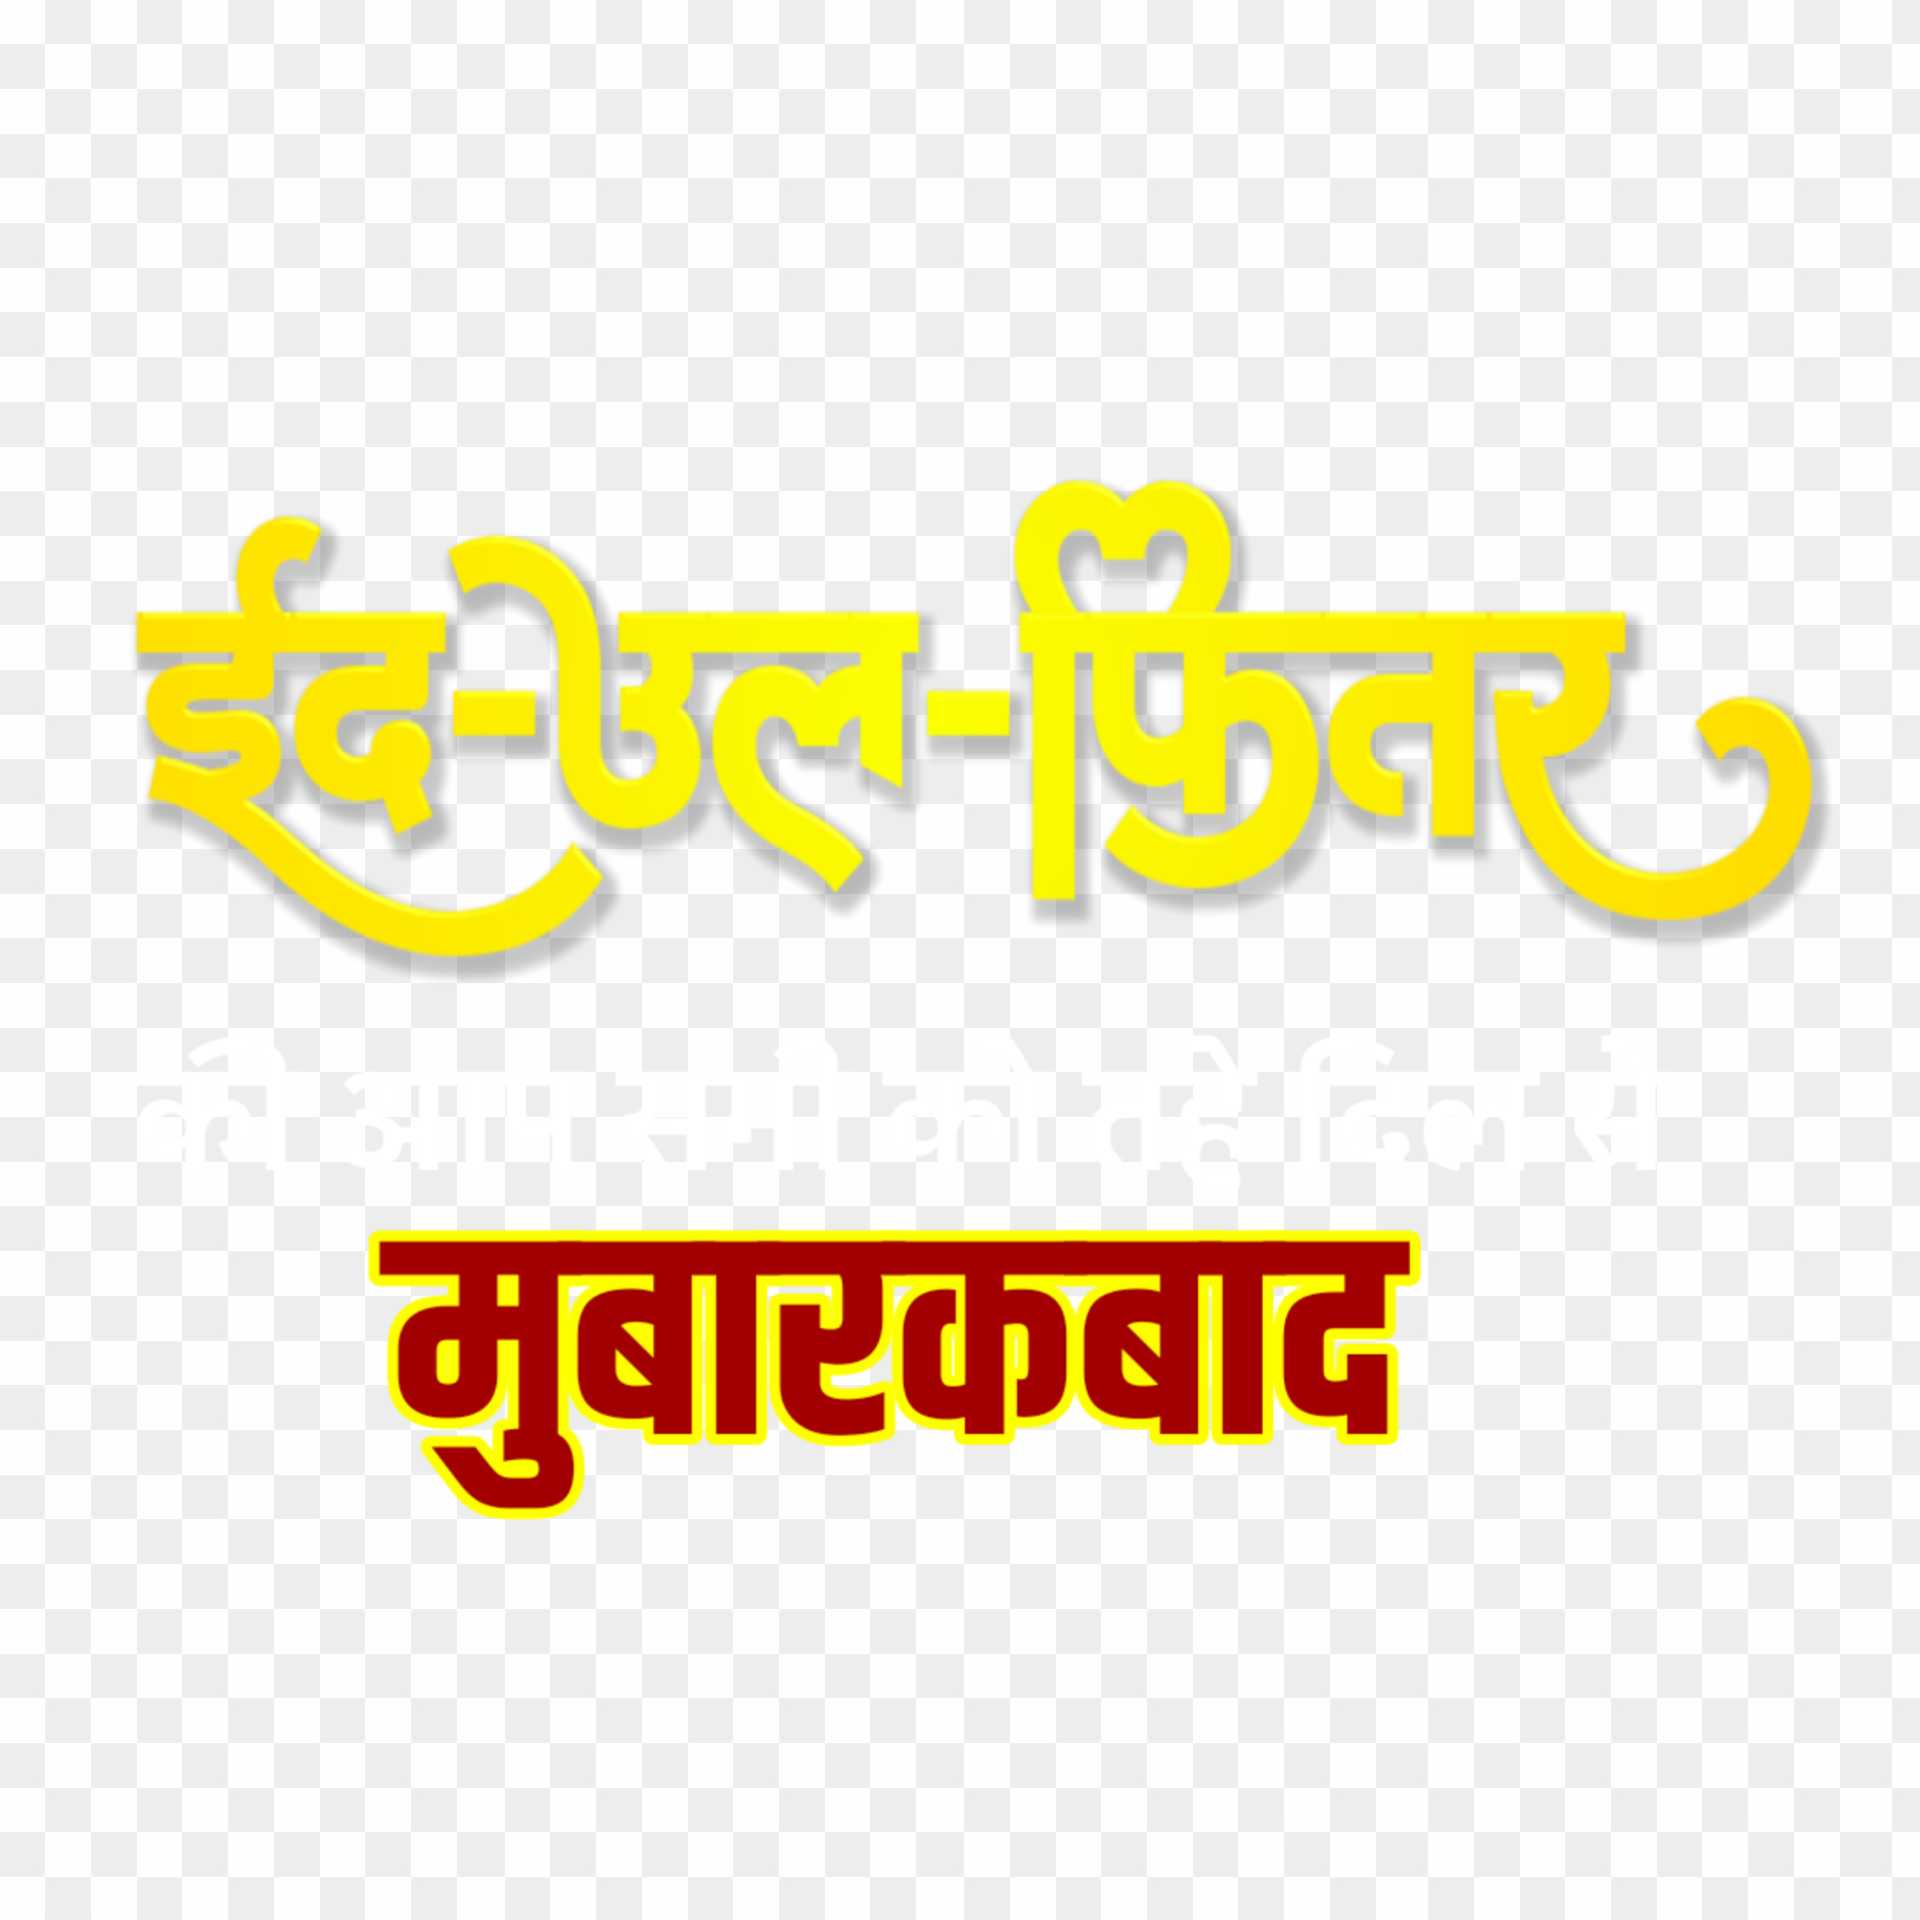 Eid ul fiter in hindi text png download 